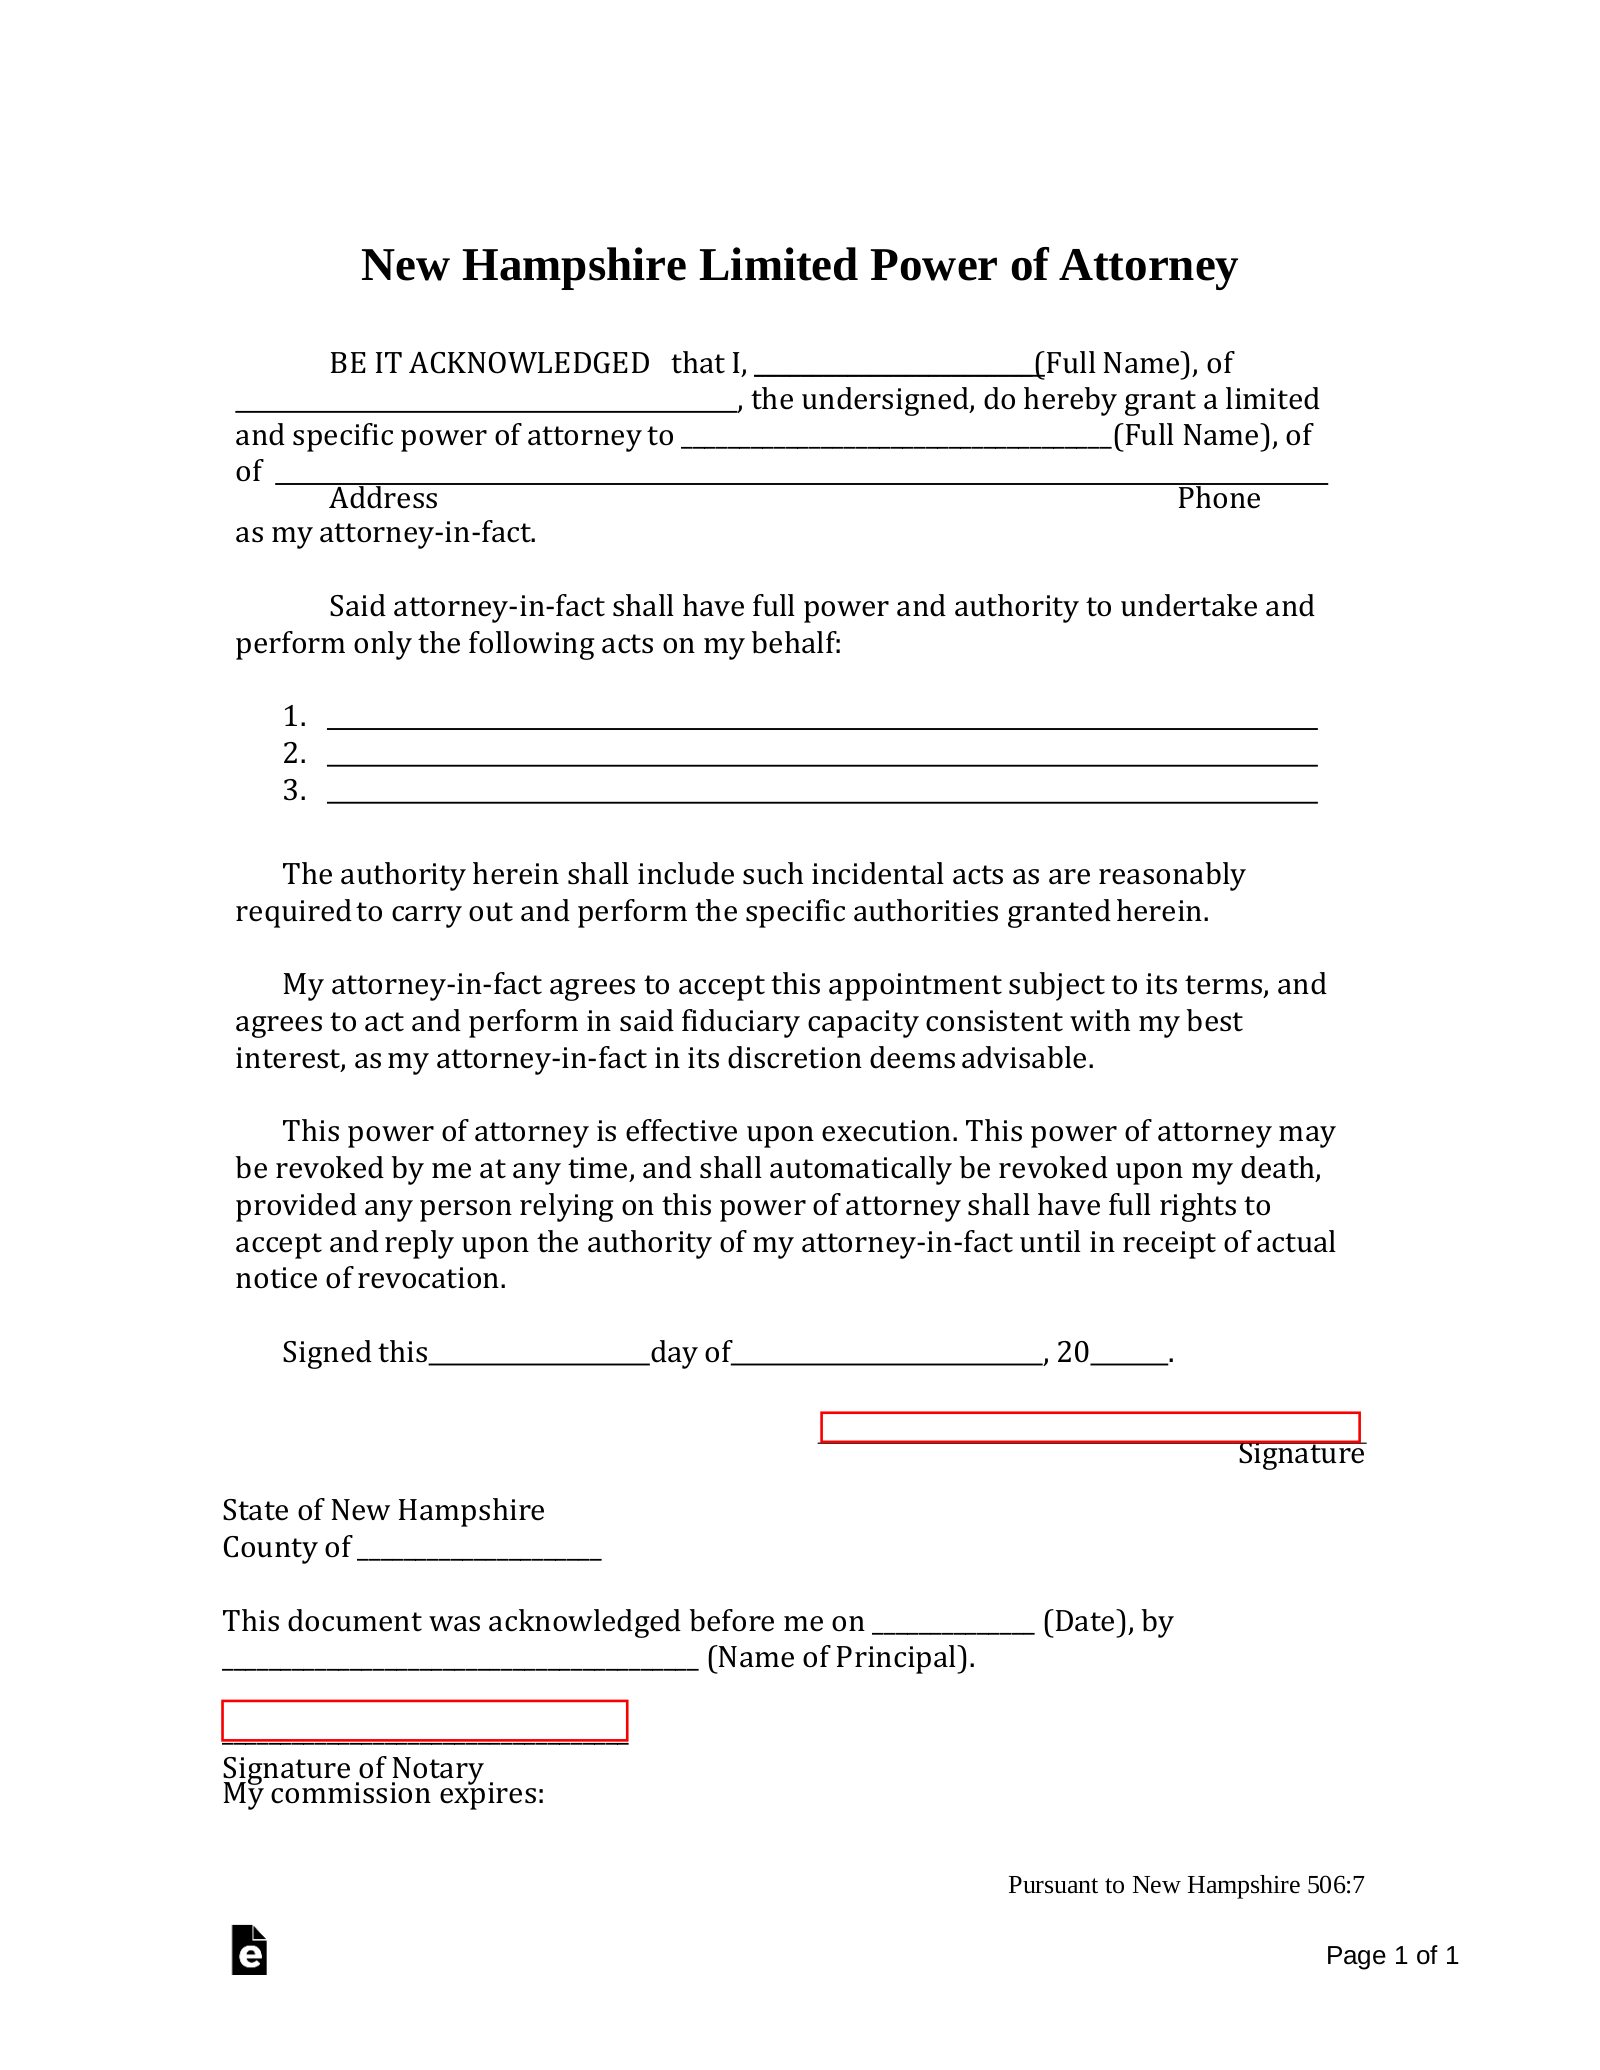 New Hampshire Limited Power of Attorney Form